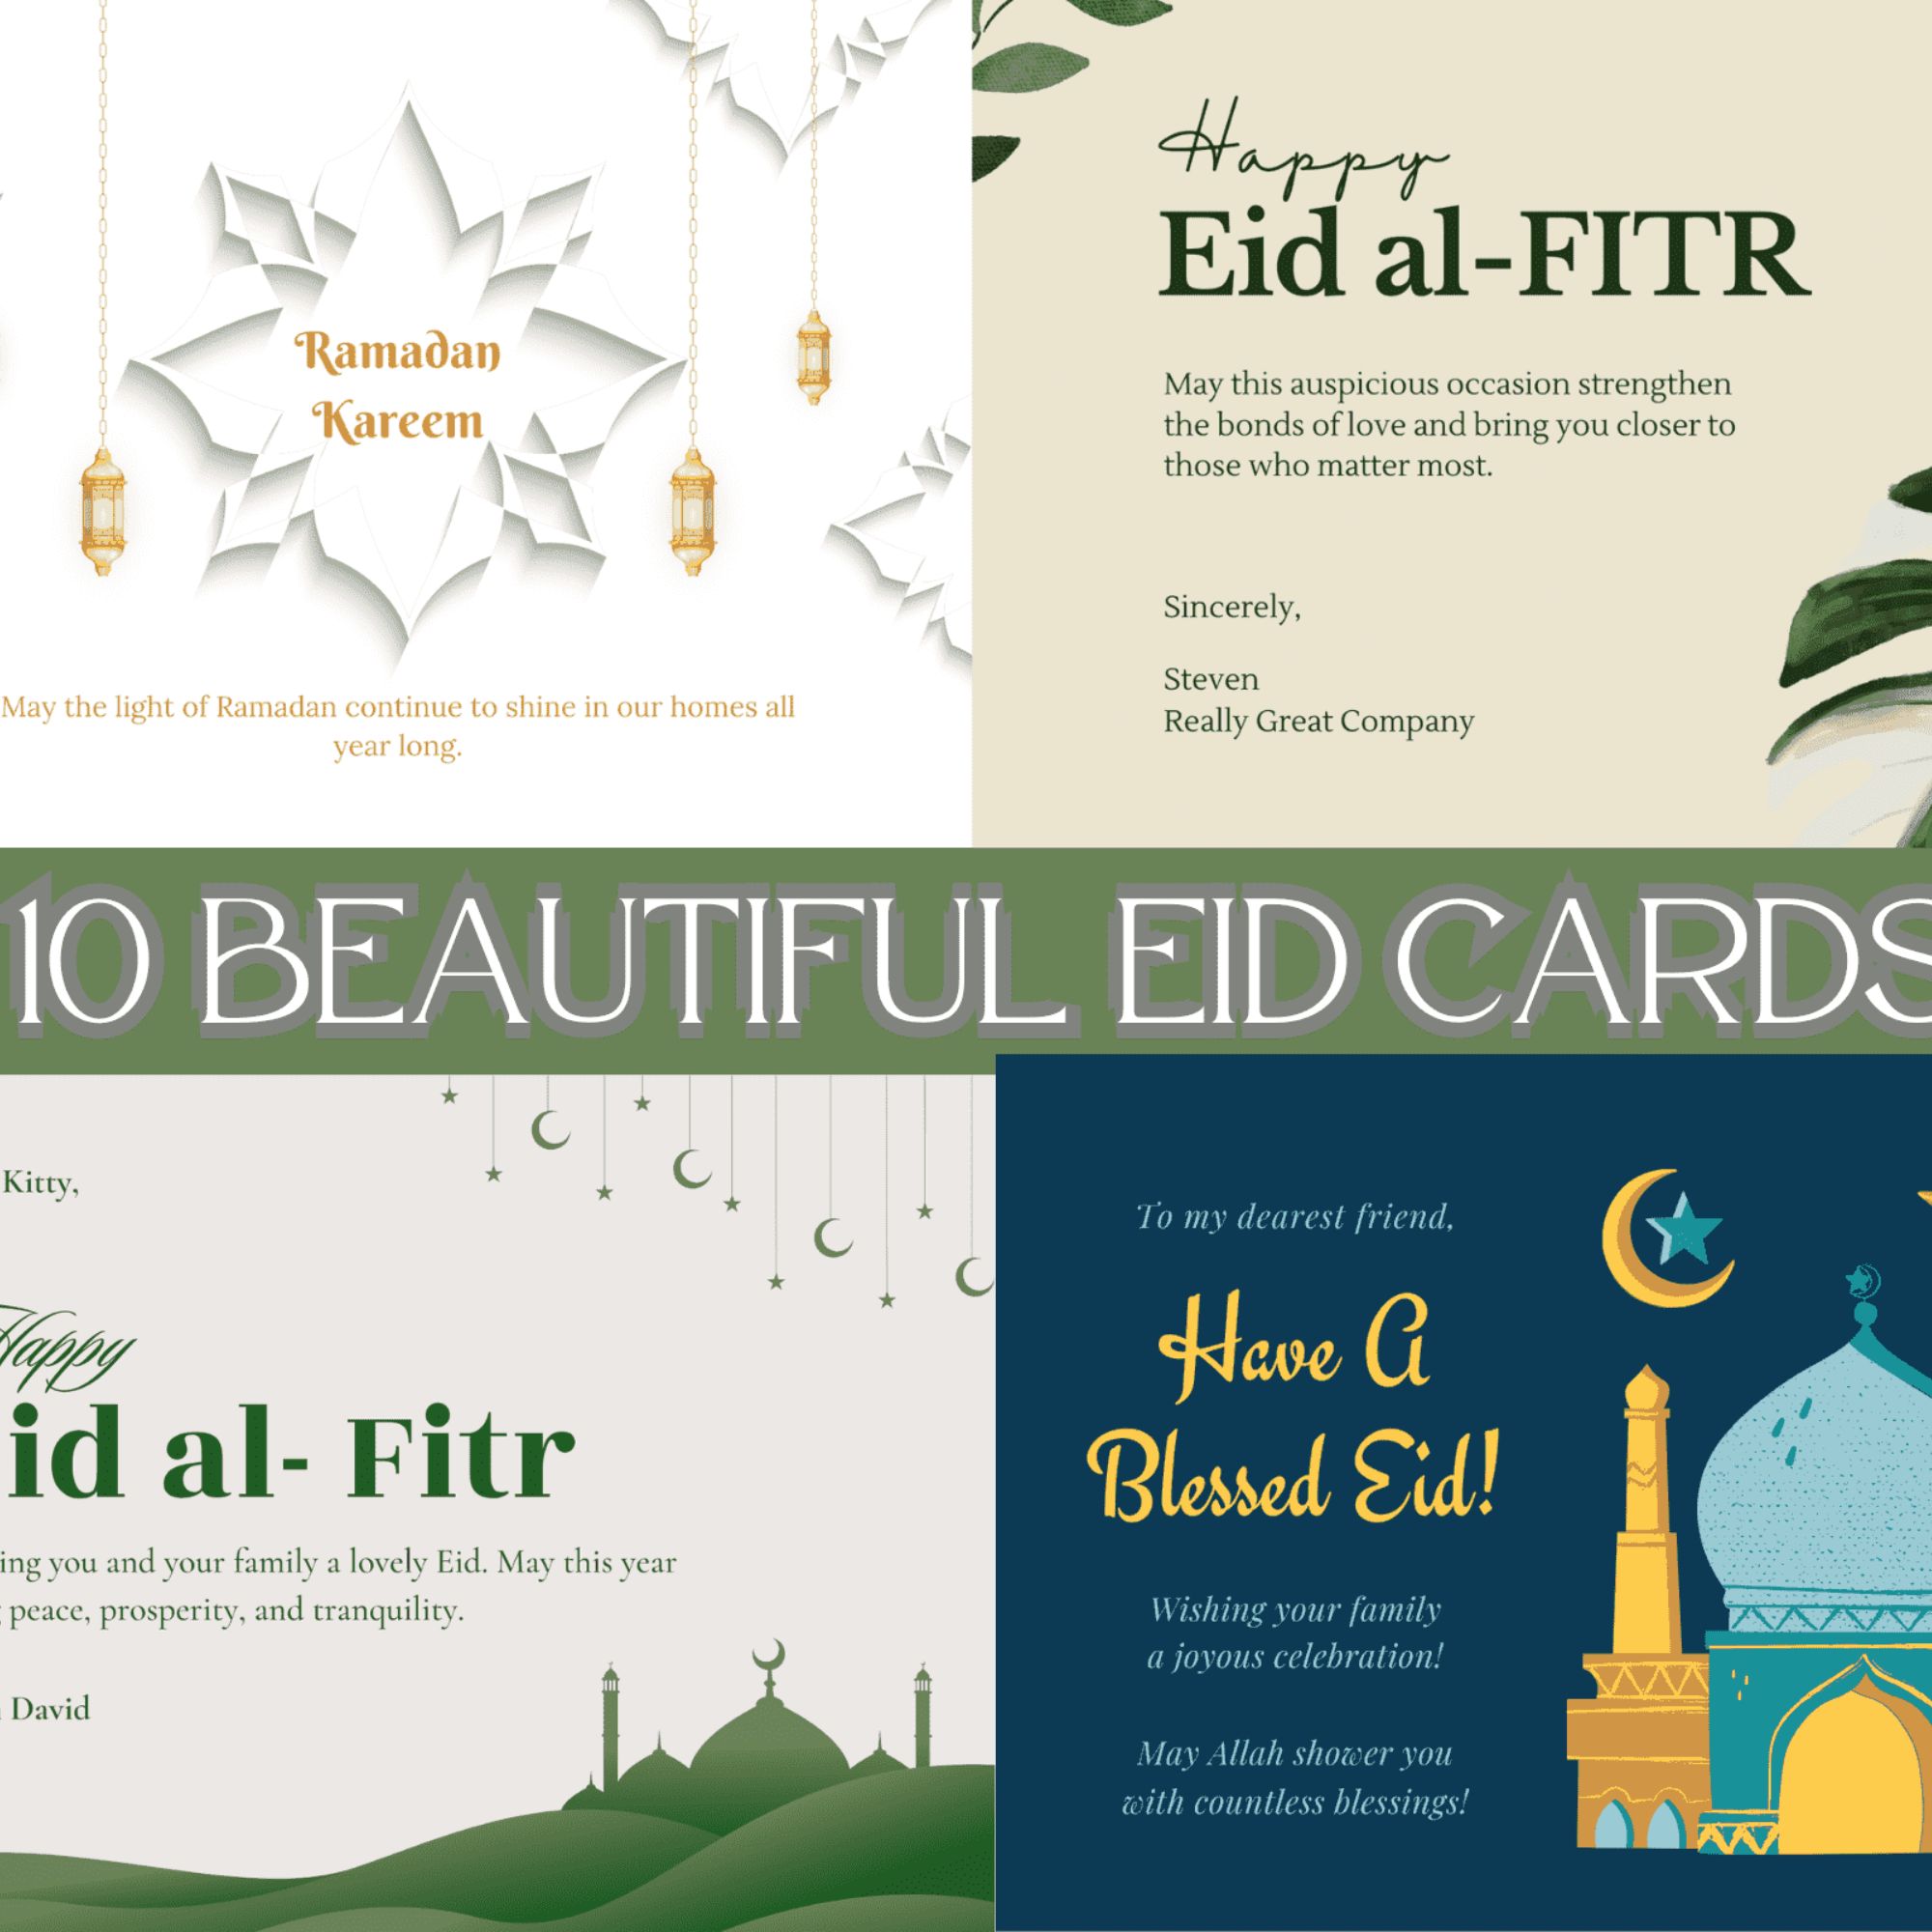 10 Beautiful Eid cards preview image.